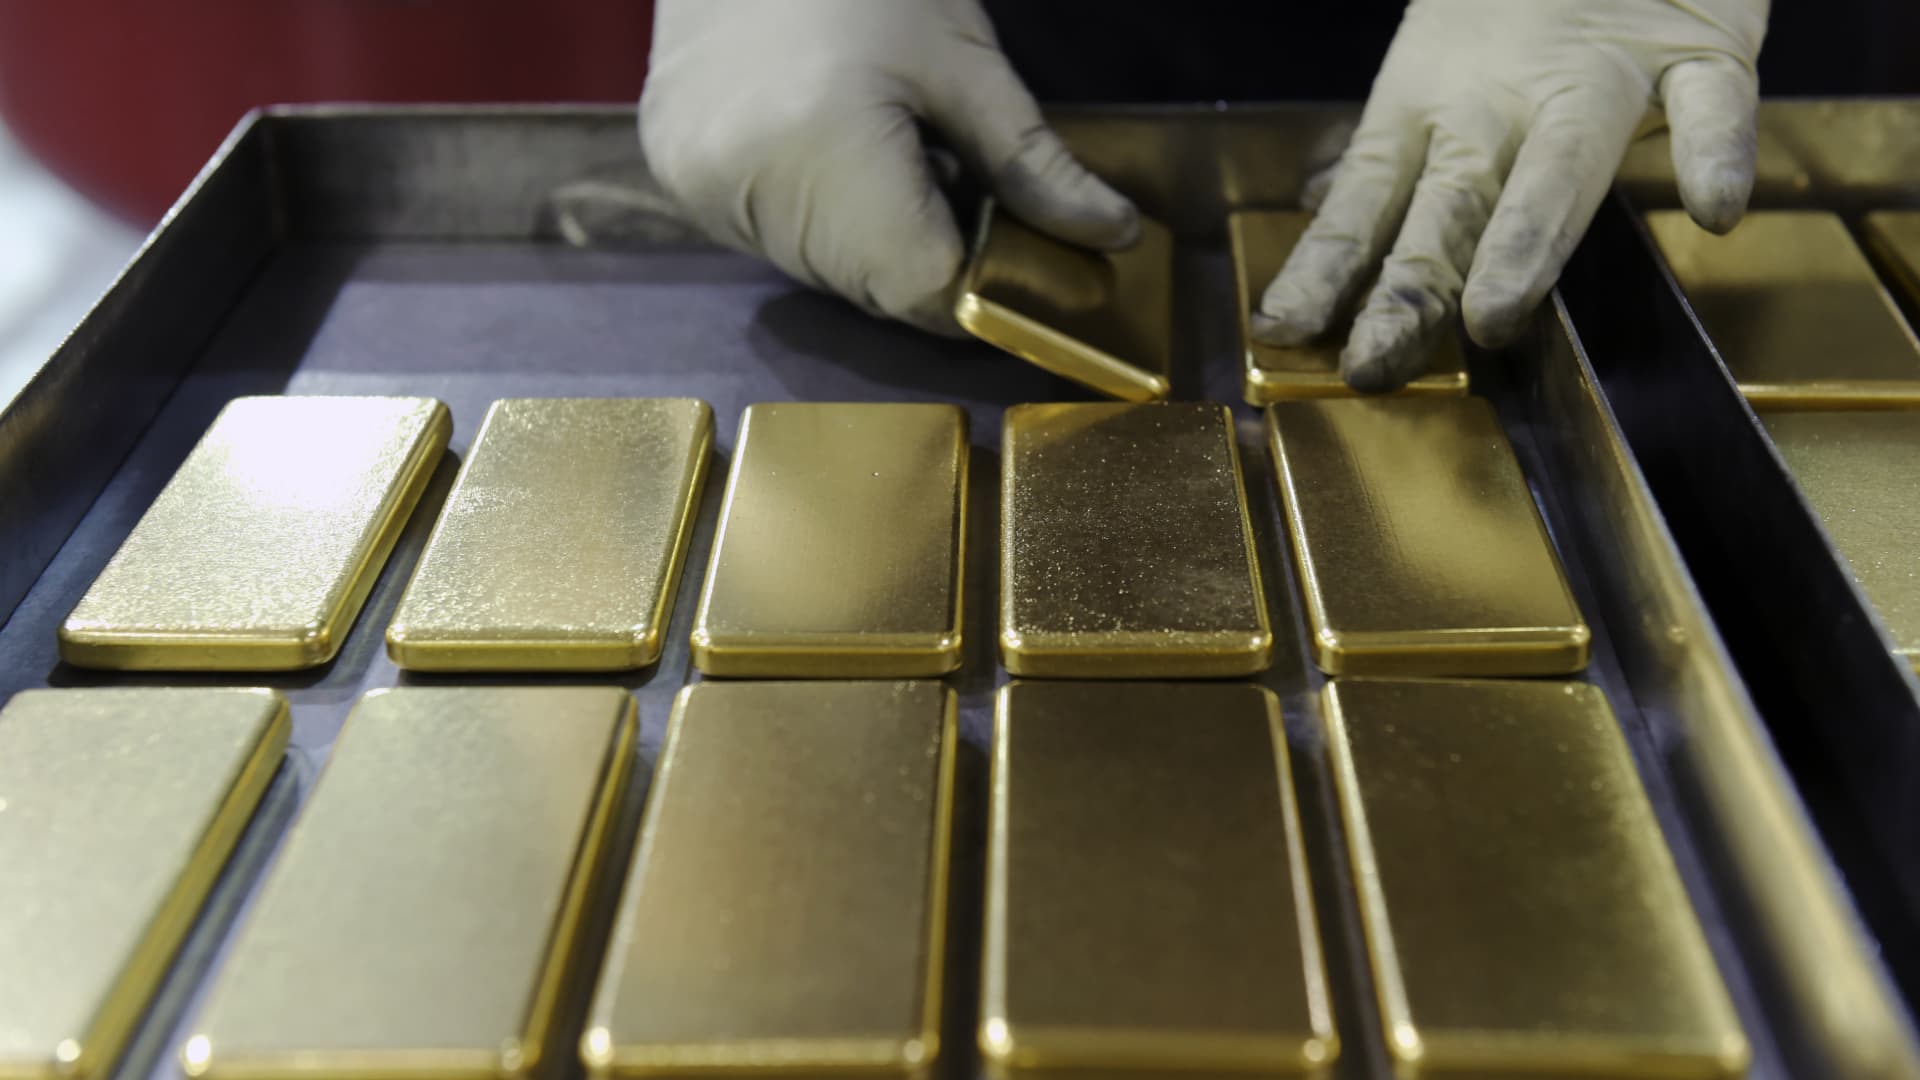 Americans think gold beats stocks as a long-term funding. Advisors disagree: ‘It’s more like a hypothesis’